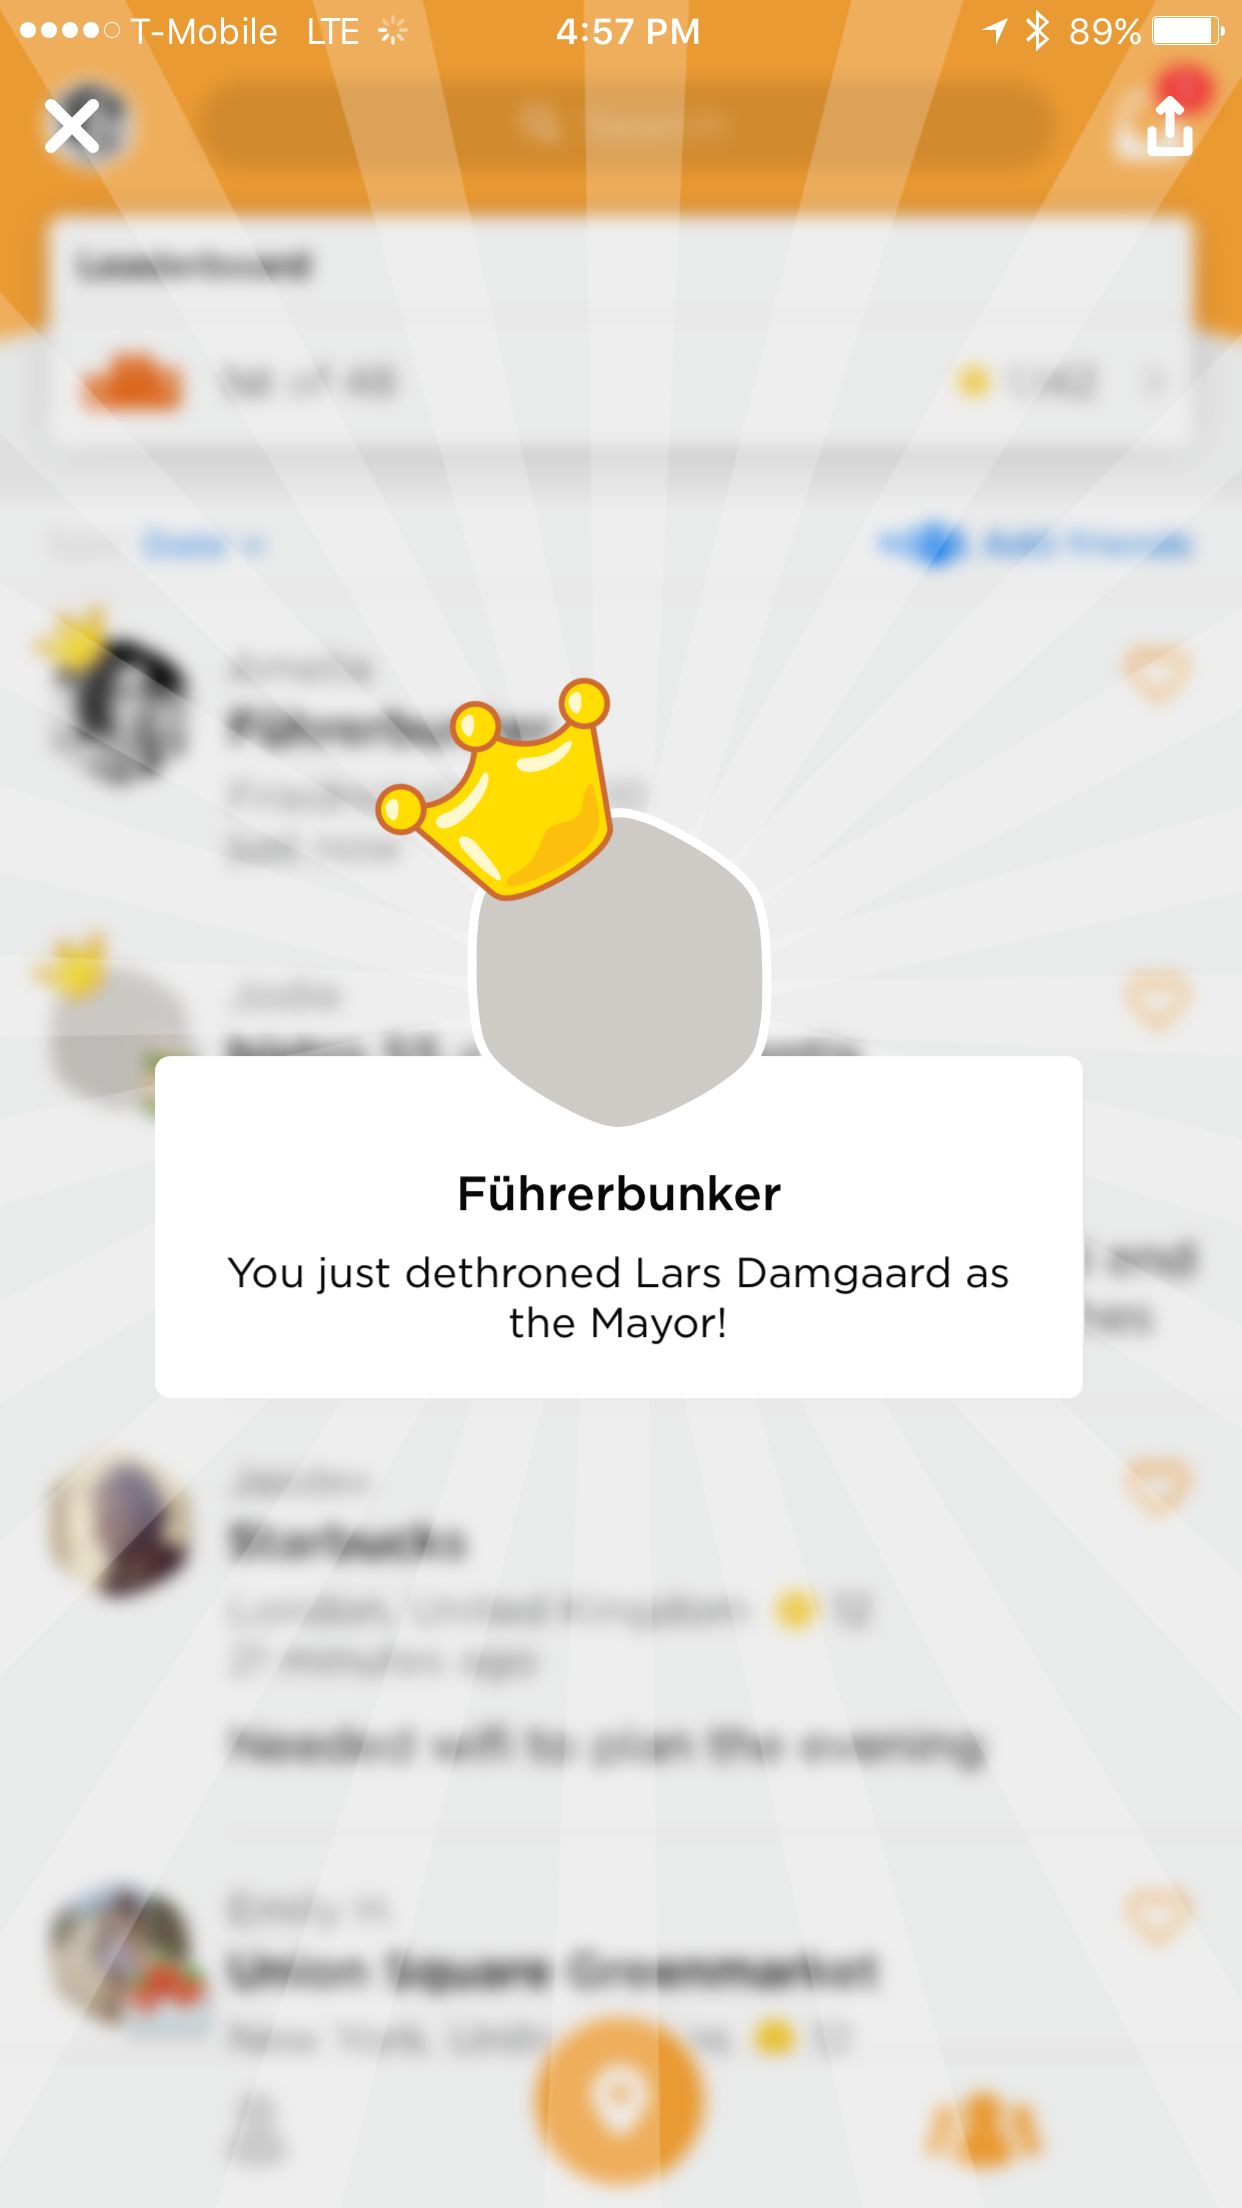 I don’t know how this happened, but apparently two checkins at the Führerbunker is enough to make you mayor. I guess no one wants to check in there. ¯\_(ツ)_/¯